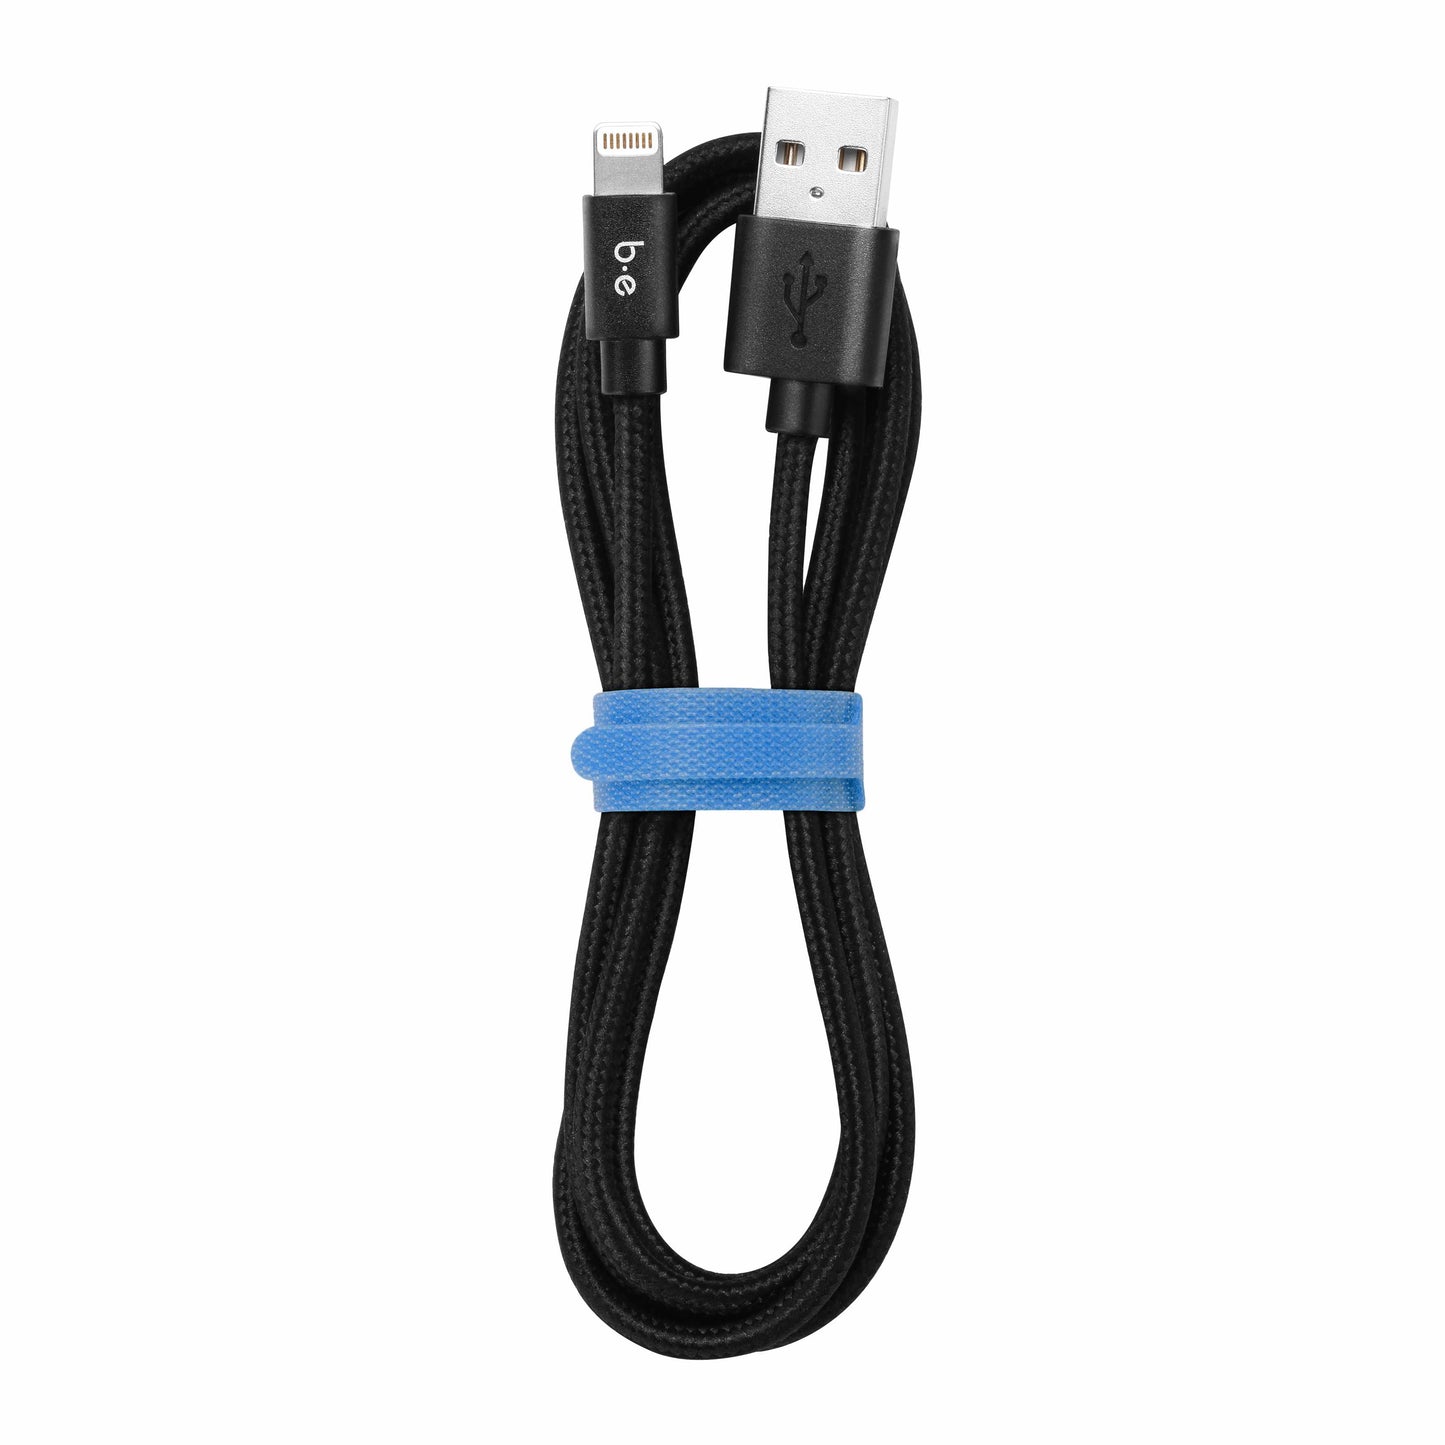 Braided Charge/Sync Lightning to USB-A Cable 6ft Black